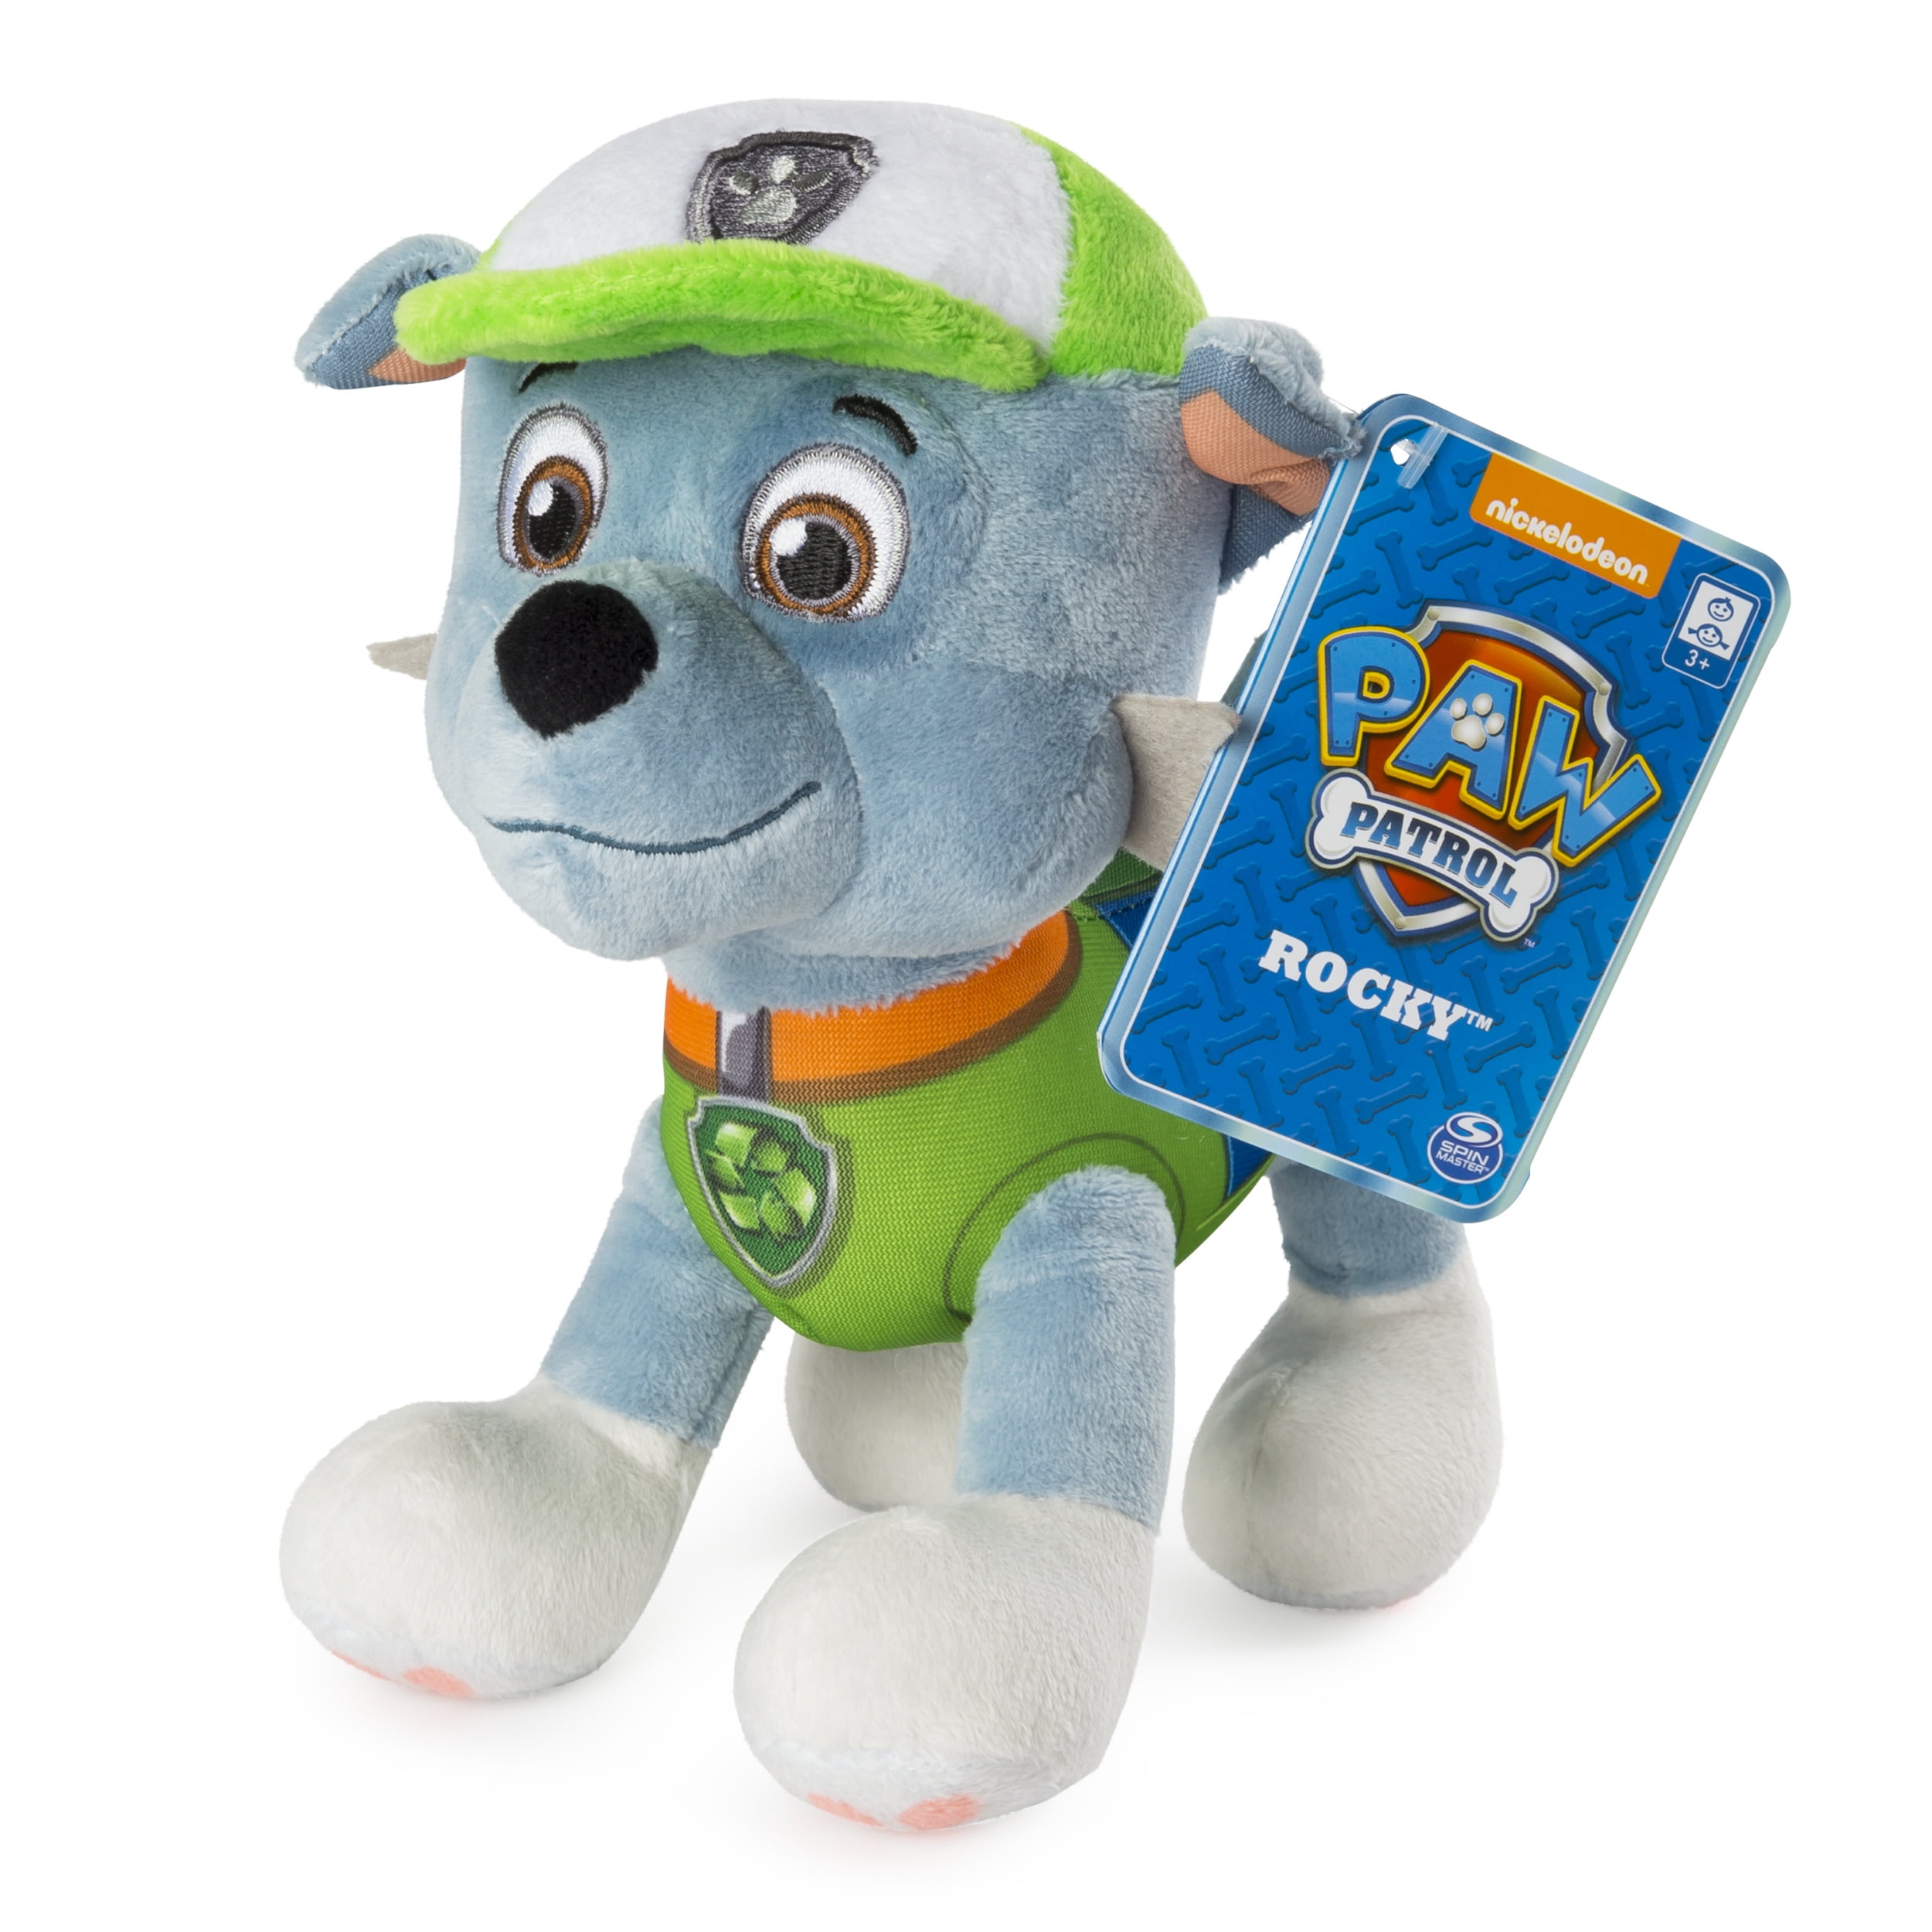 PAW Patrol – 8” Rocky Plush Toy, Standing Plush with Stitched Detailing, for Ages 3 and up